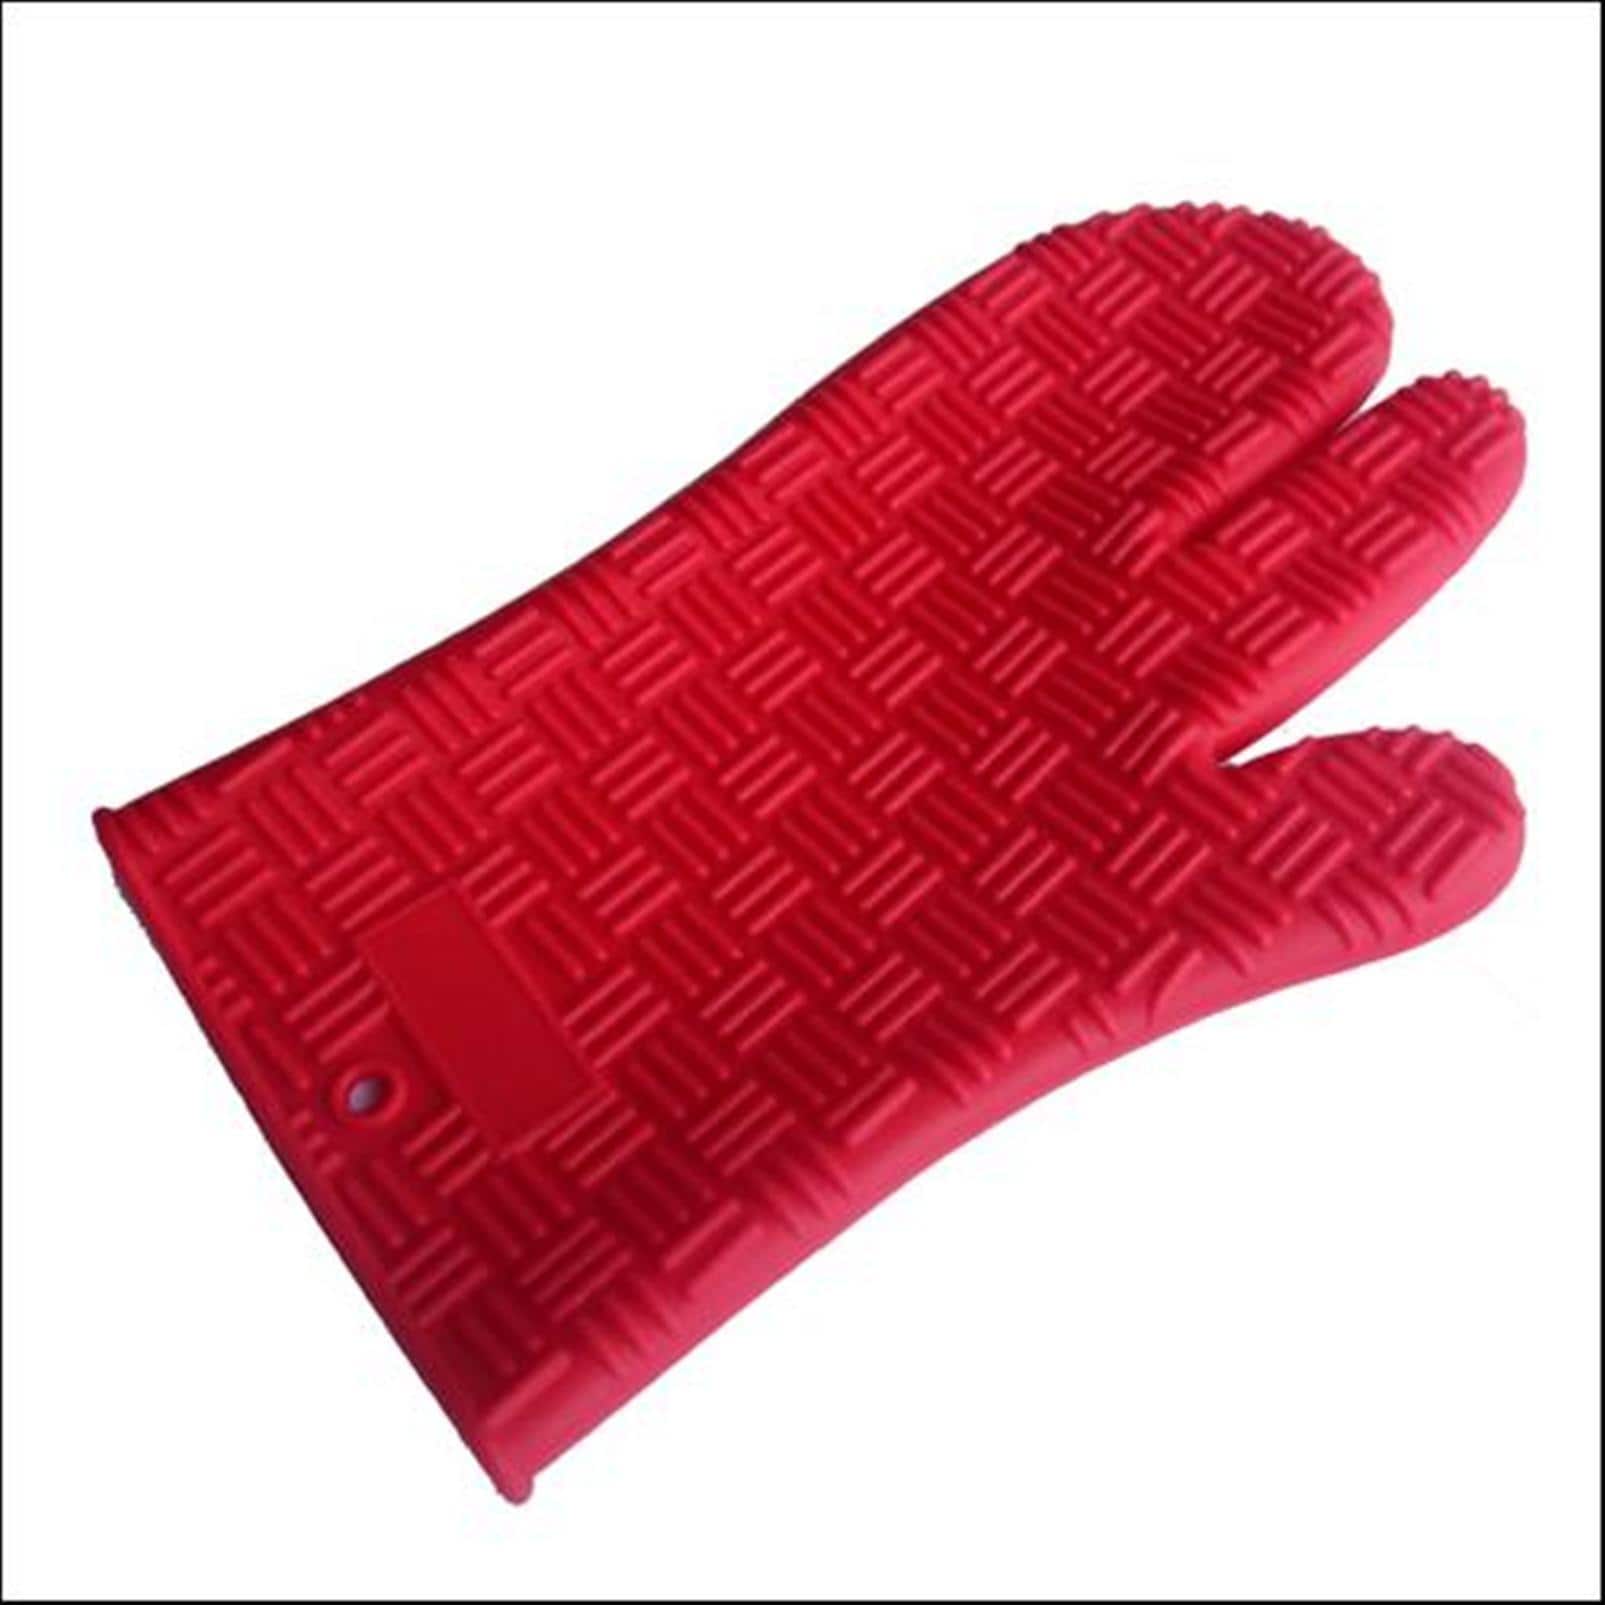 silicone oven mitts pattern